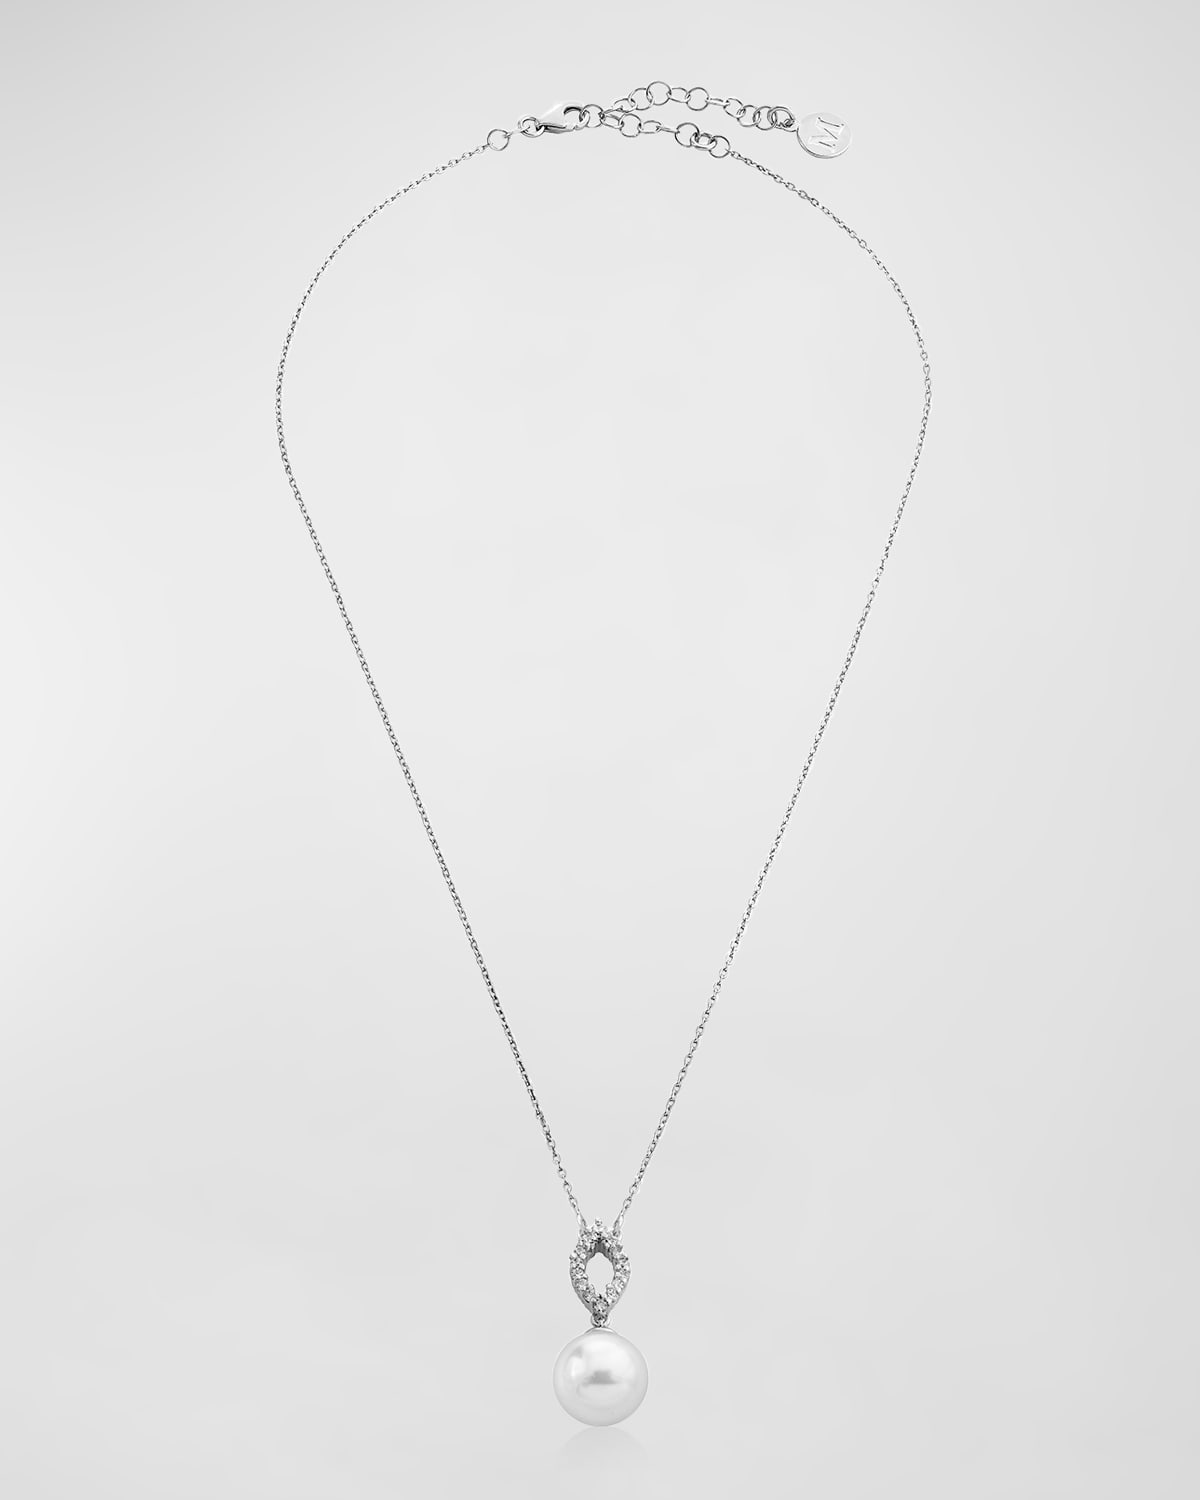 Lilit Pearl Pendant Necklace with Cubic Zirconia Open Bale